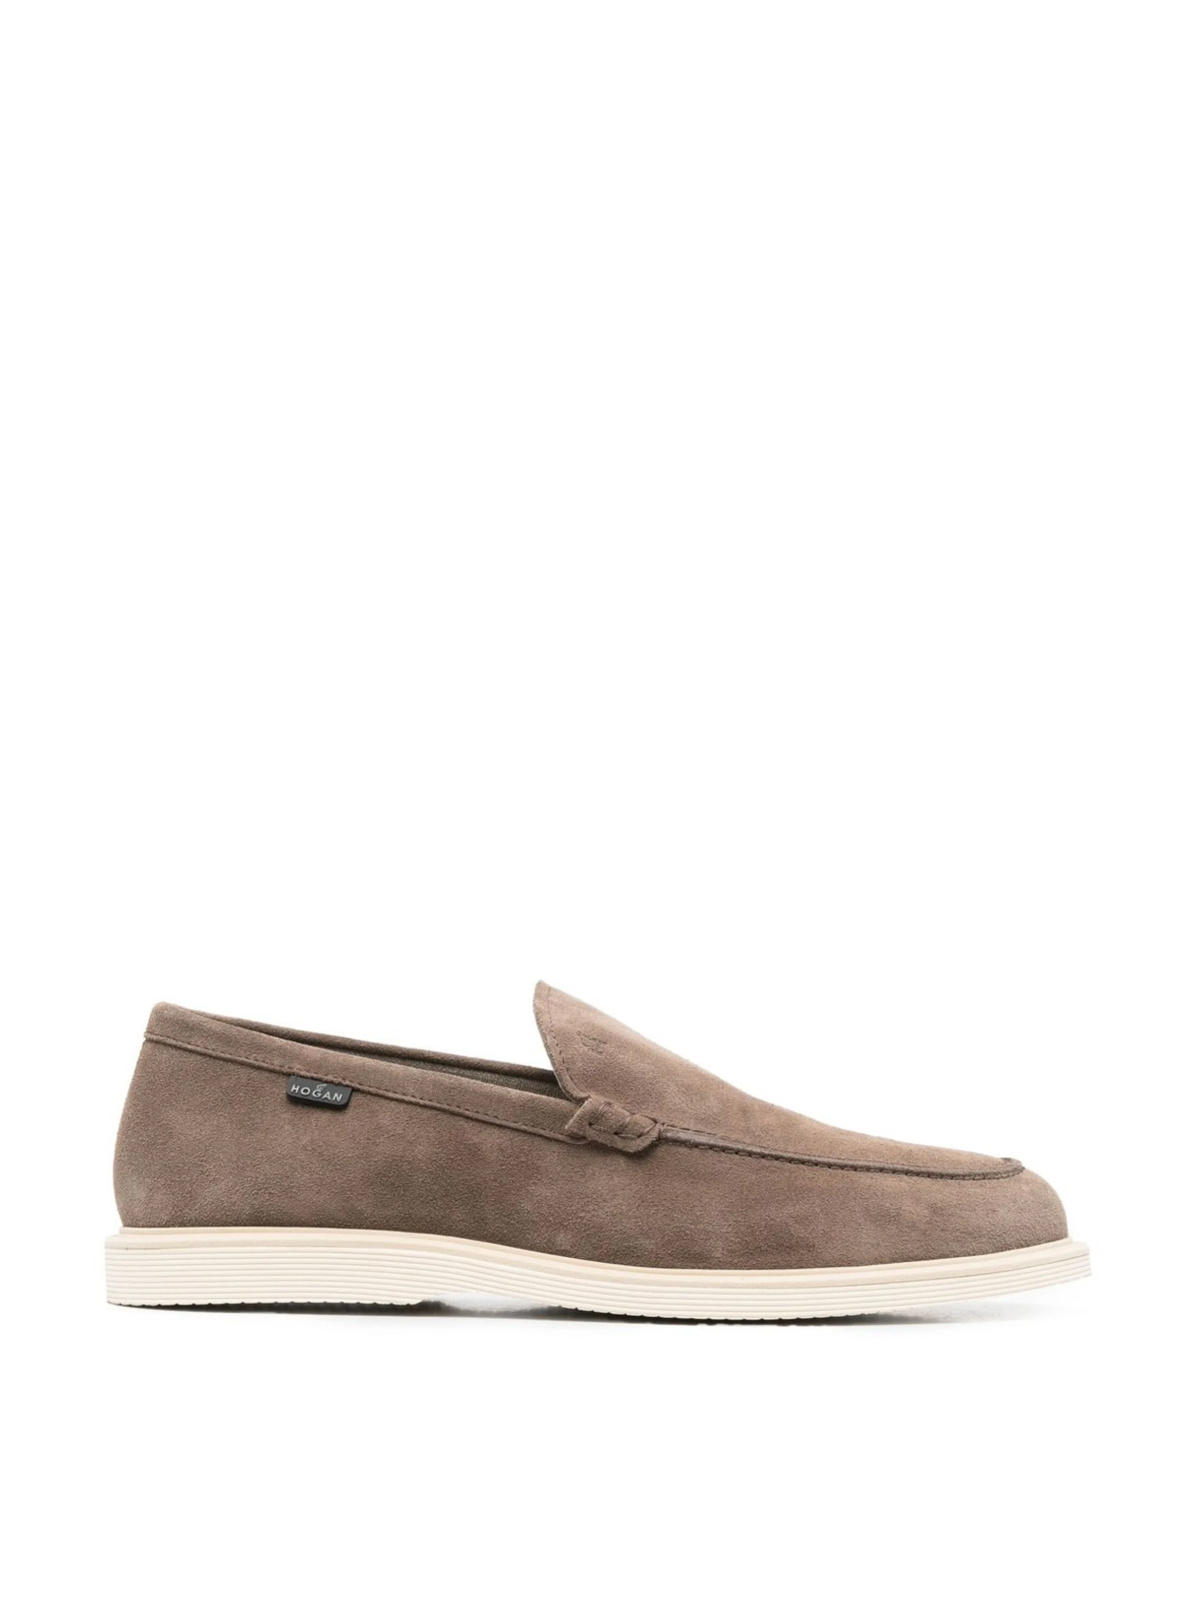 H616 Suede Loafers